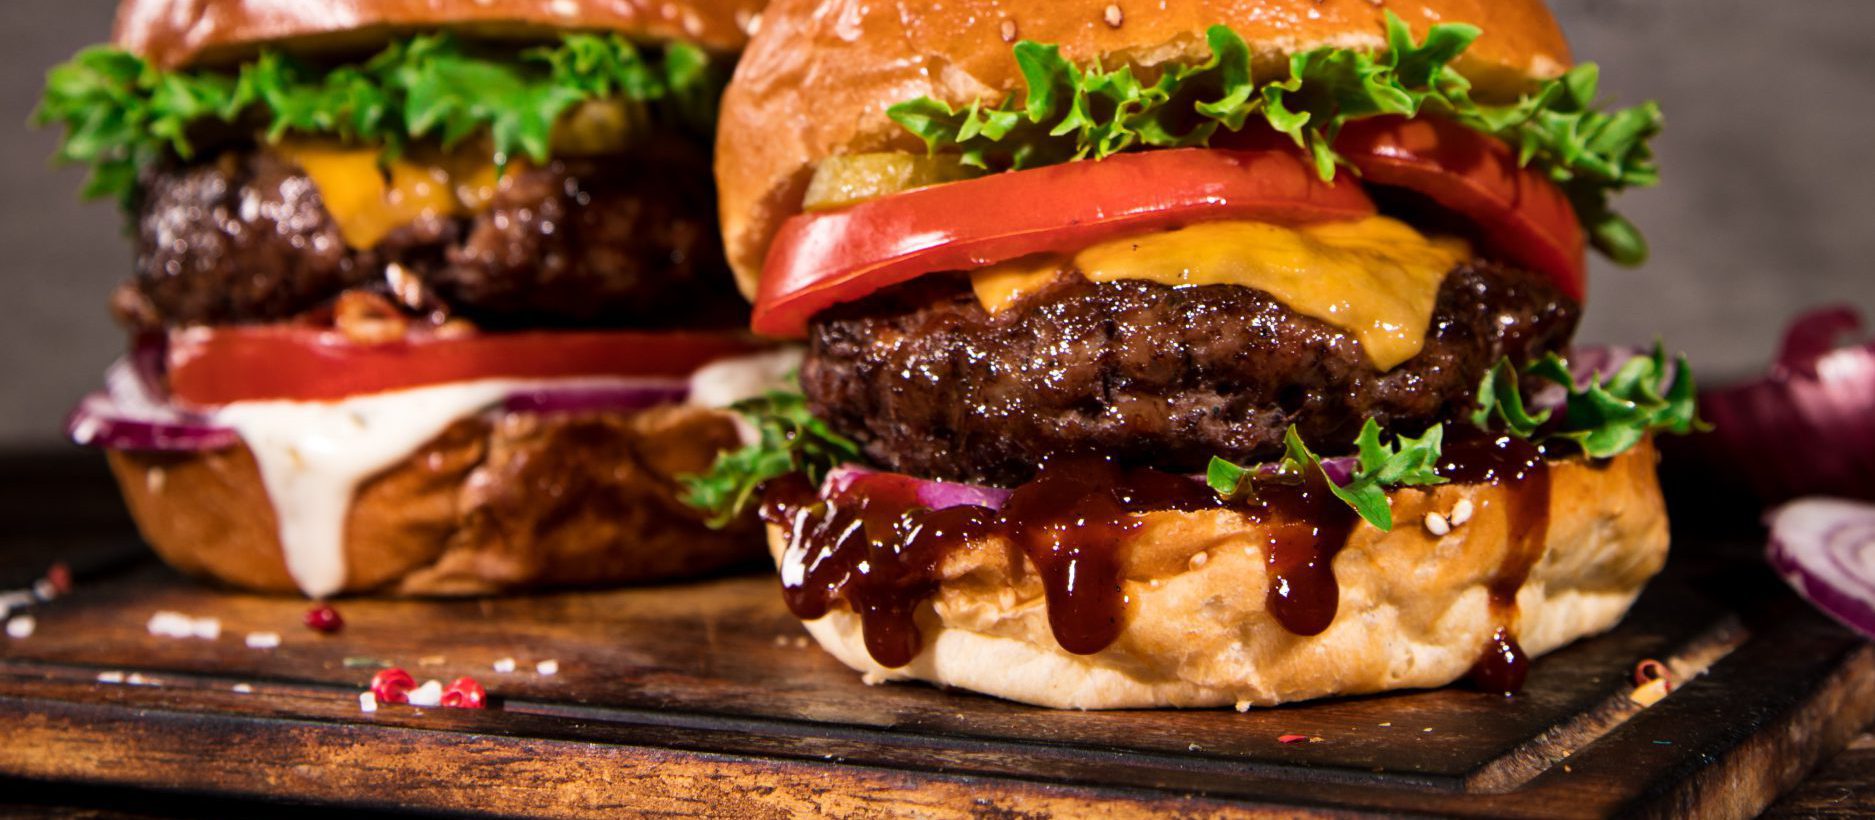 Close-up,Of,Home,Made,Tasty,Burgers,On,Wooden,Table.